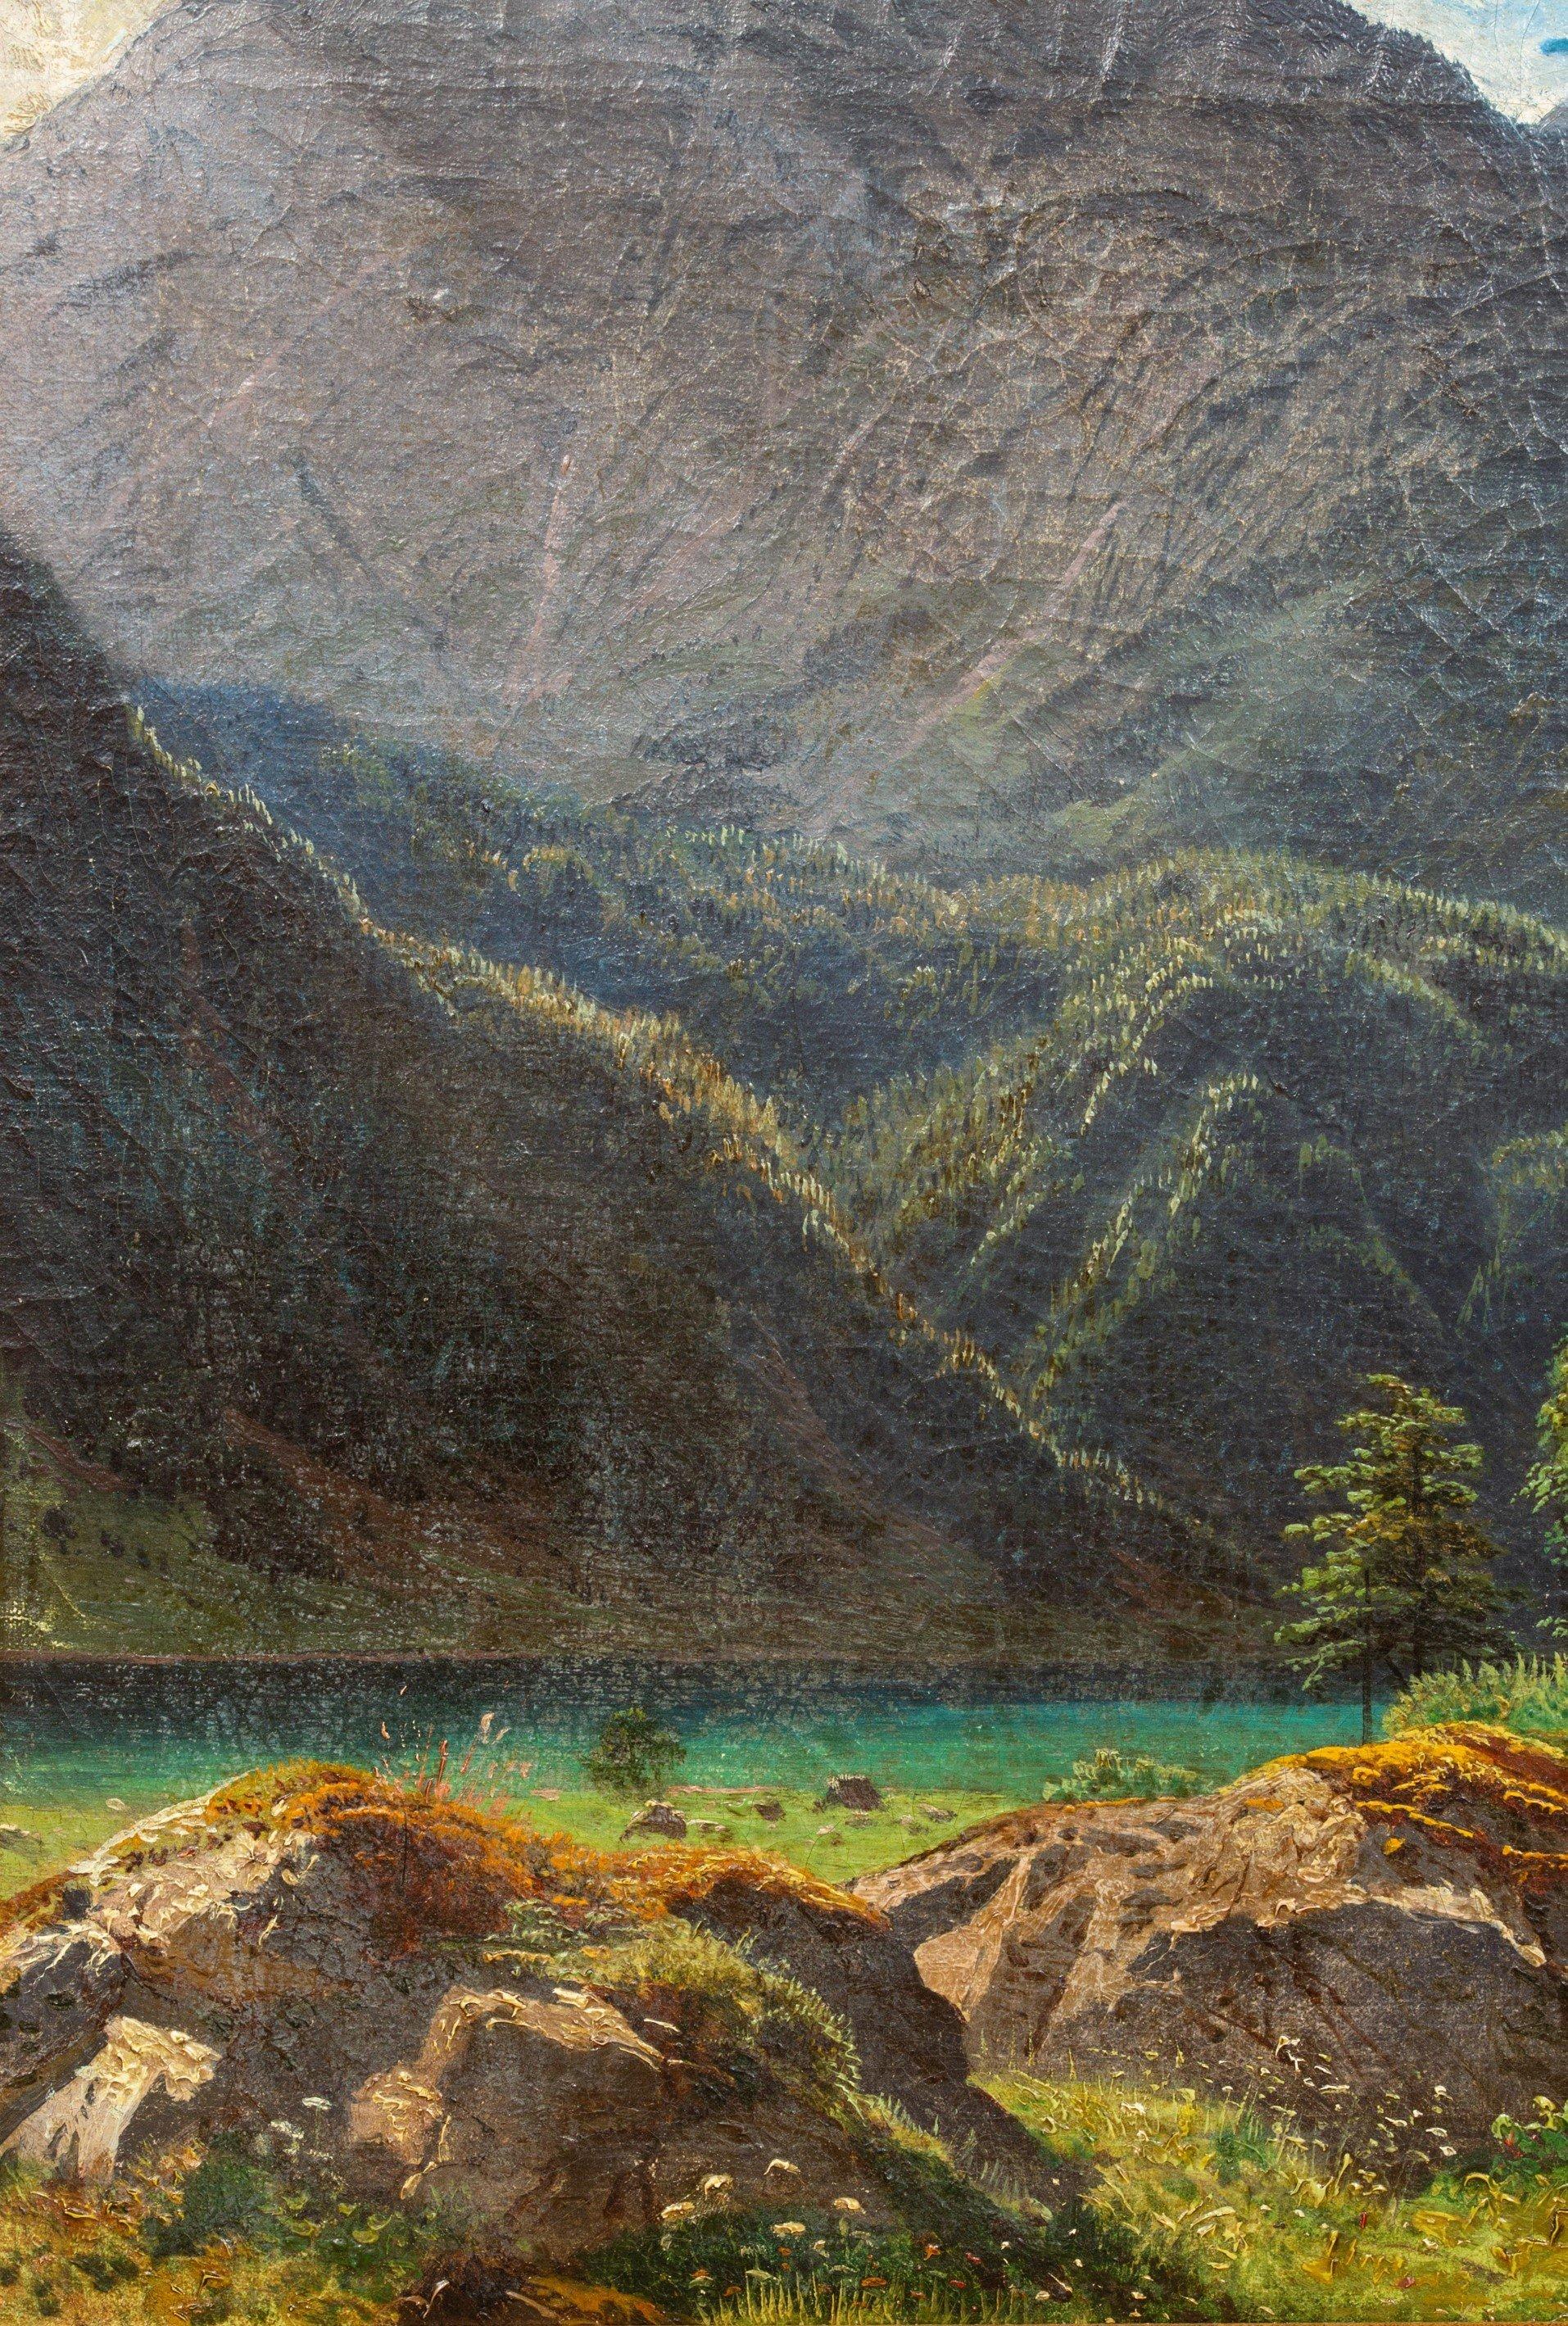 Obersee by François Roffiaen (1820-1898) Oil on canvas For Sale 5